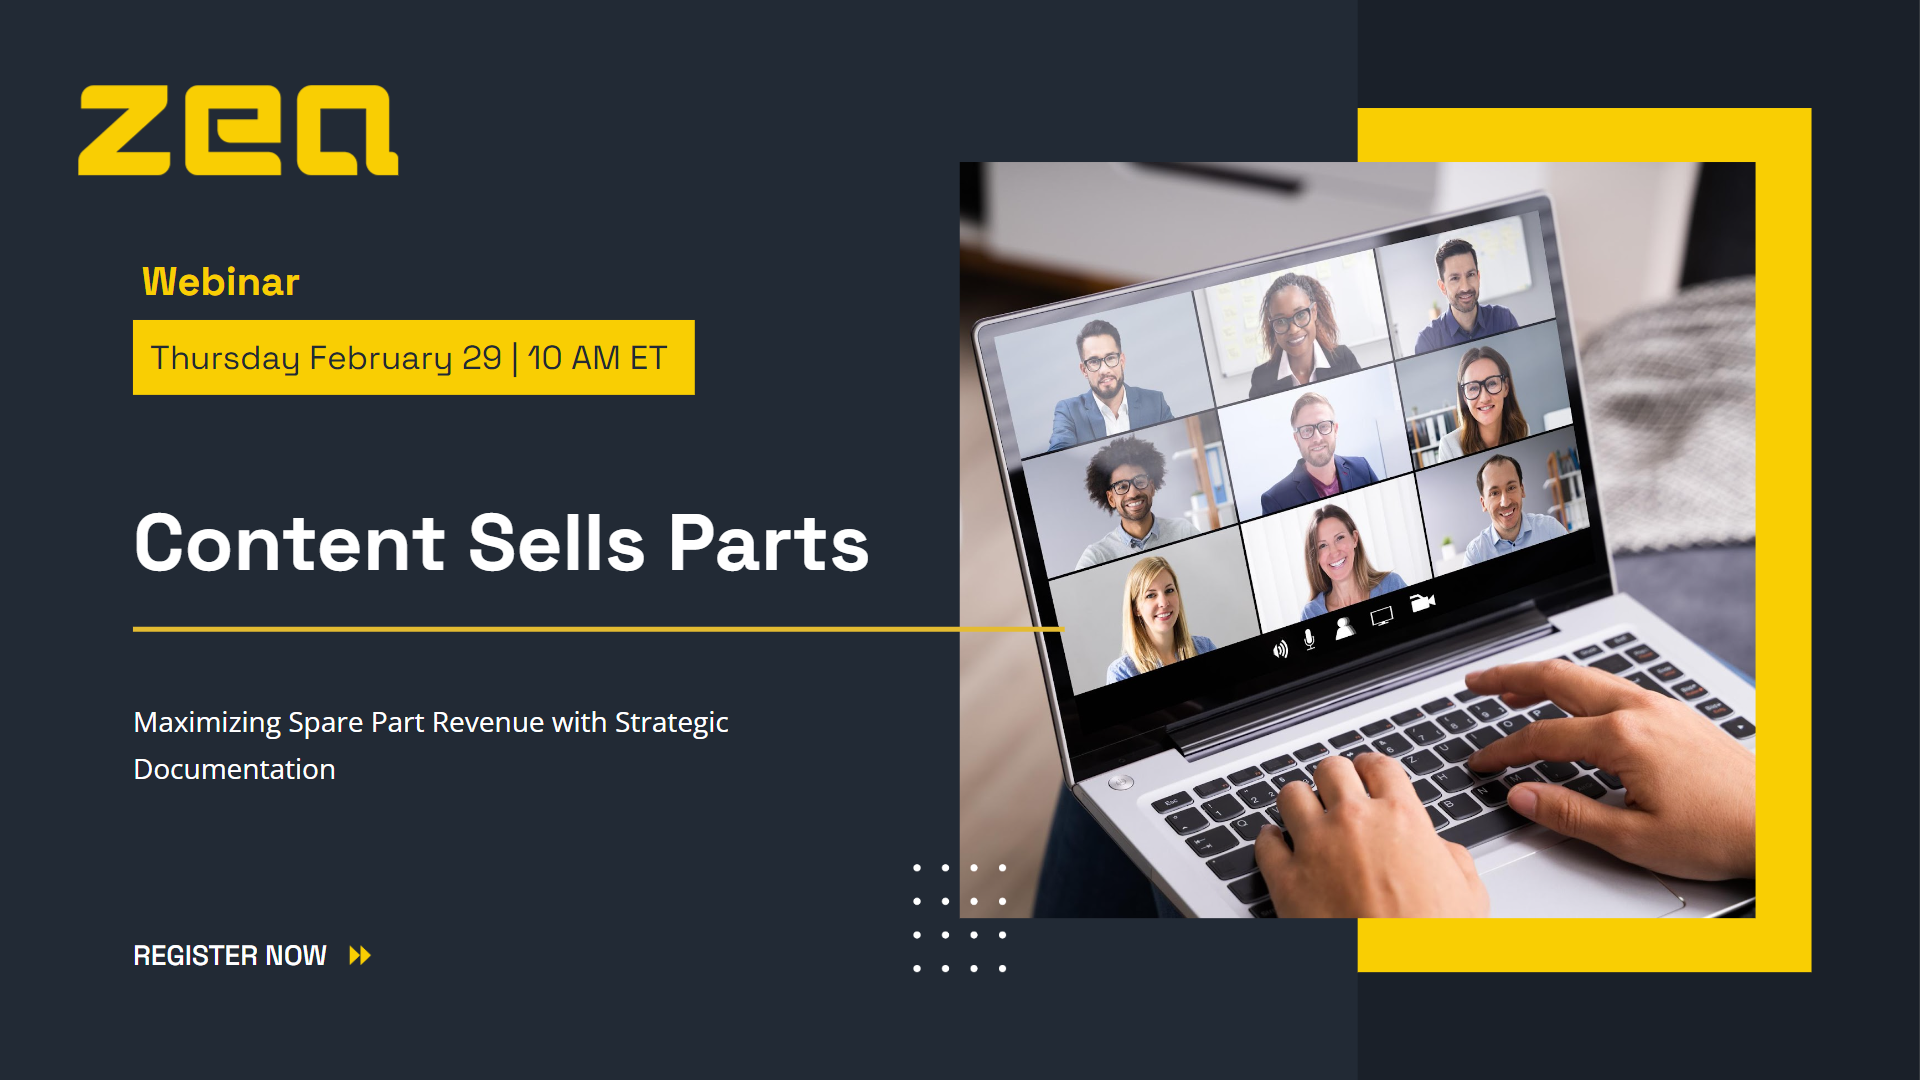 Hal Trent and Michael Smith explain how to use structured content to increase revenue from spare part sales.